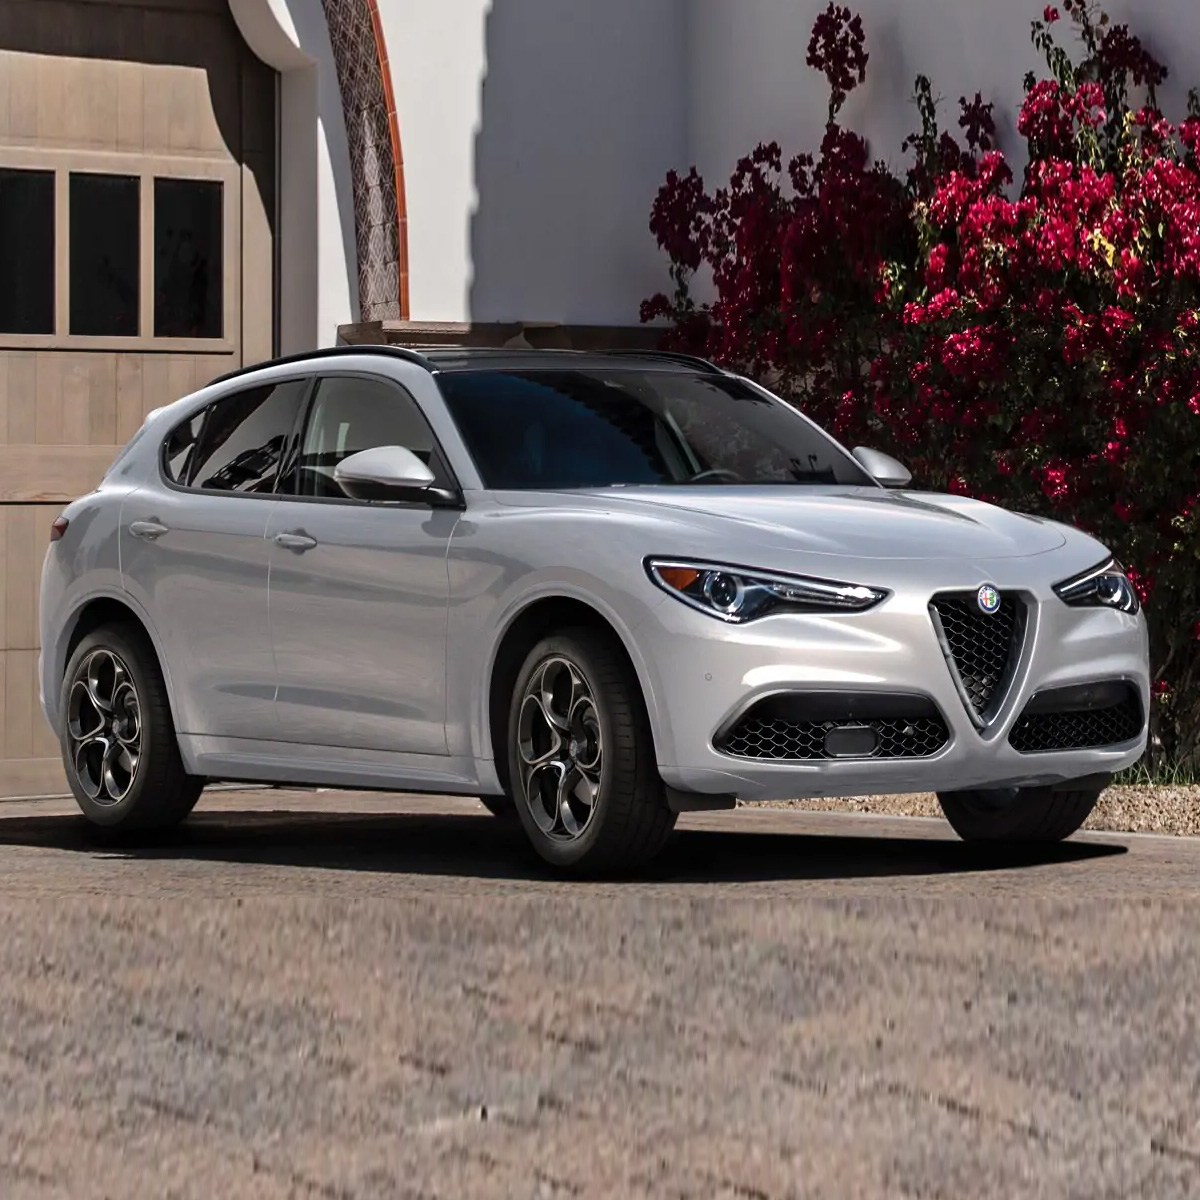 2021 Alfa Romeo Stelvio parked in front of a house